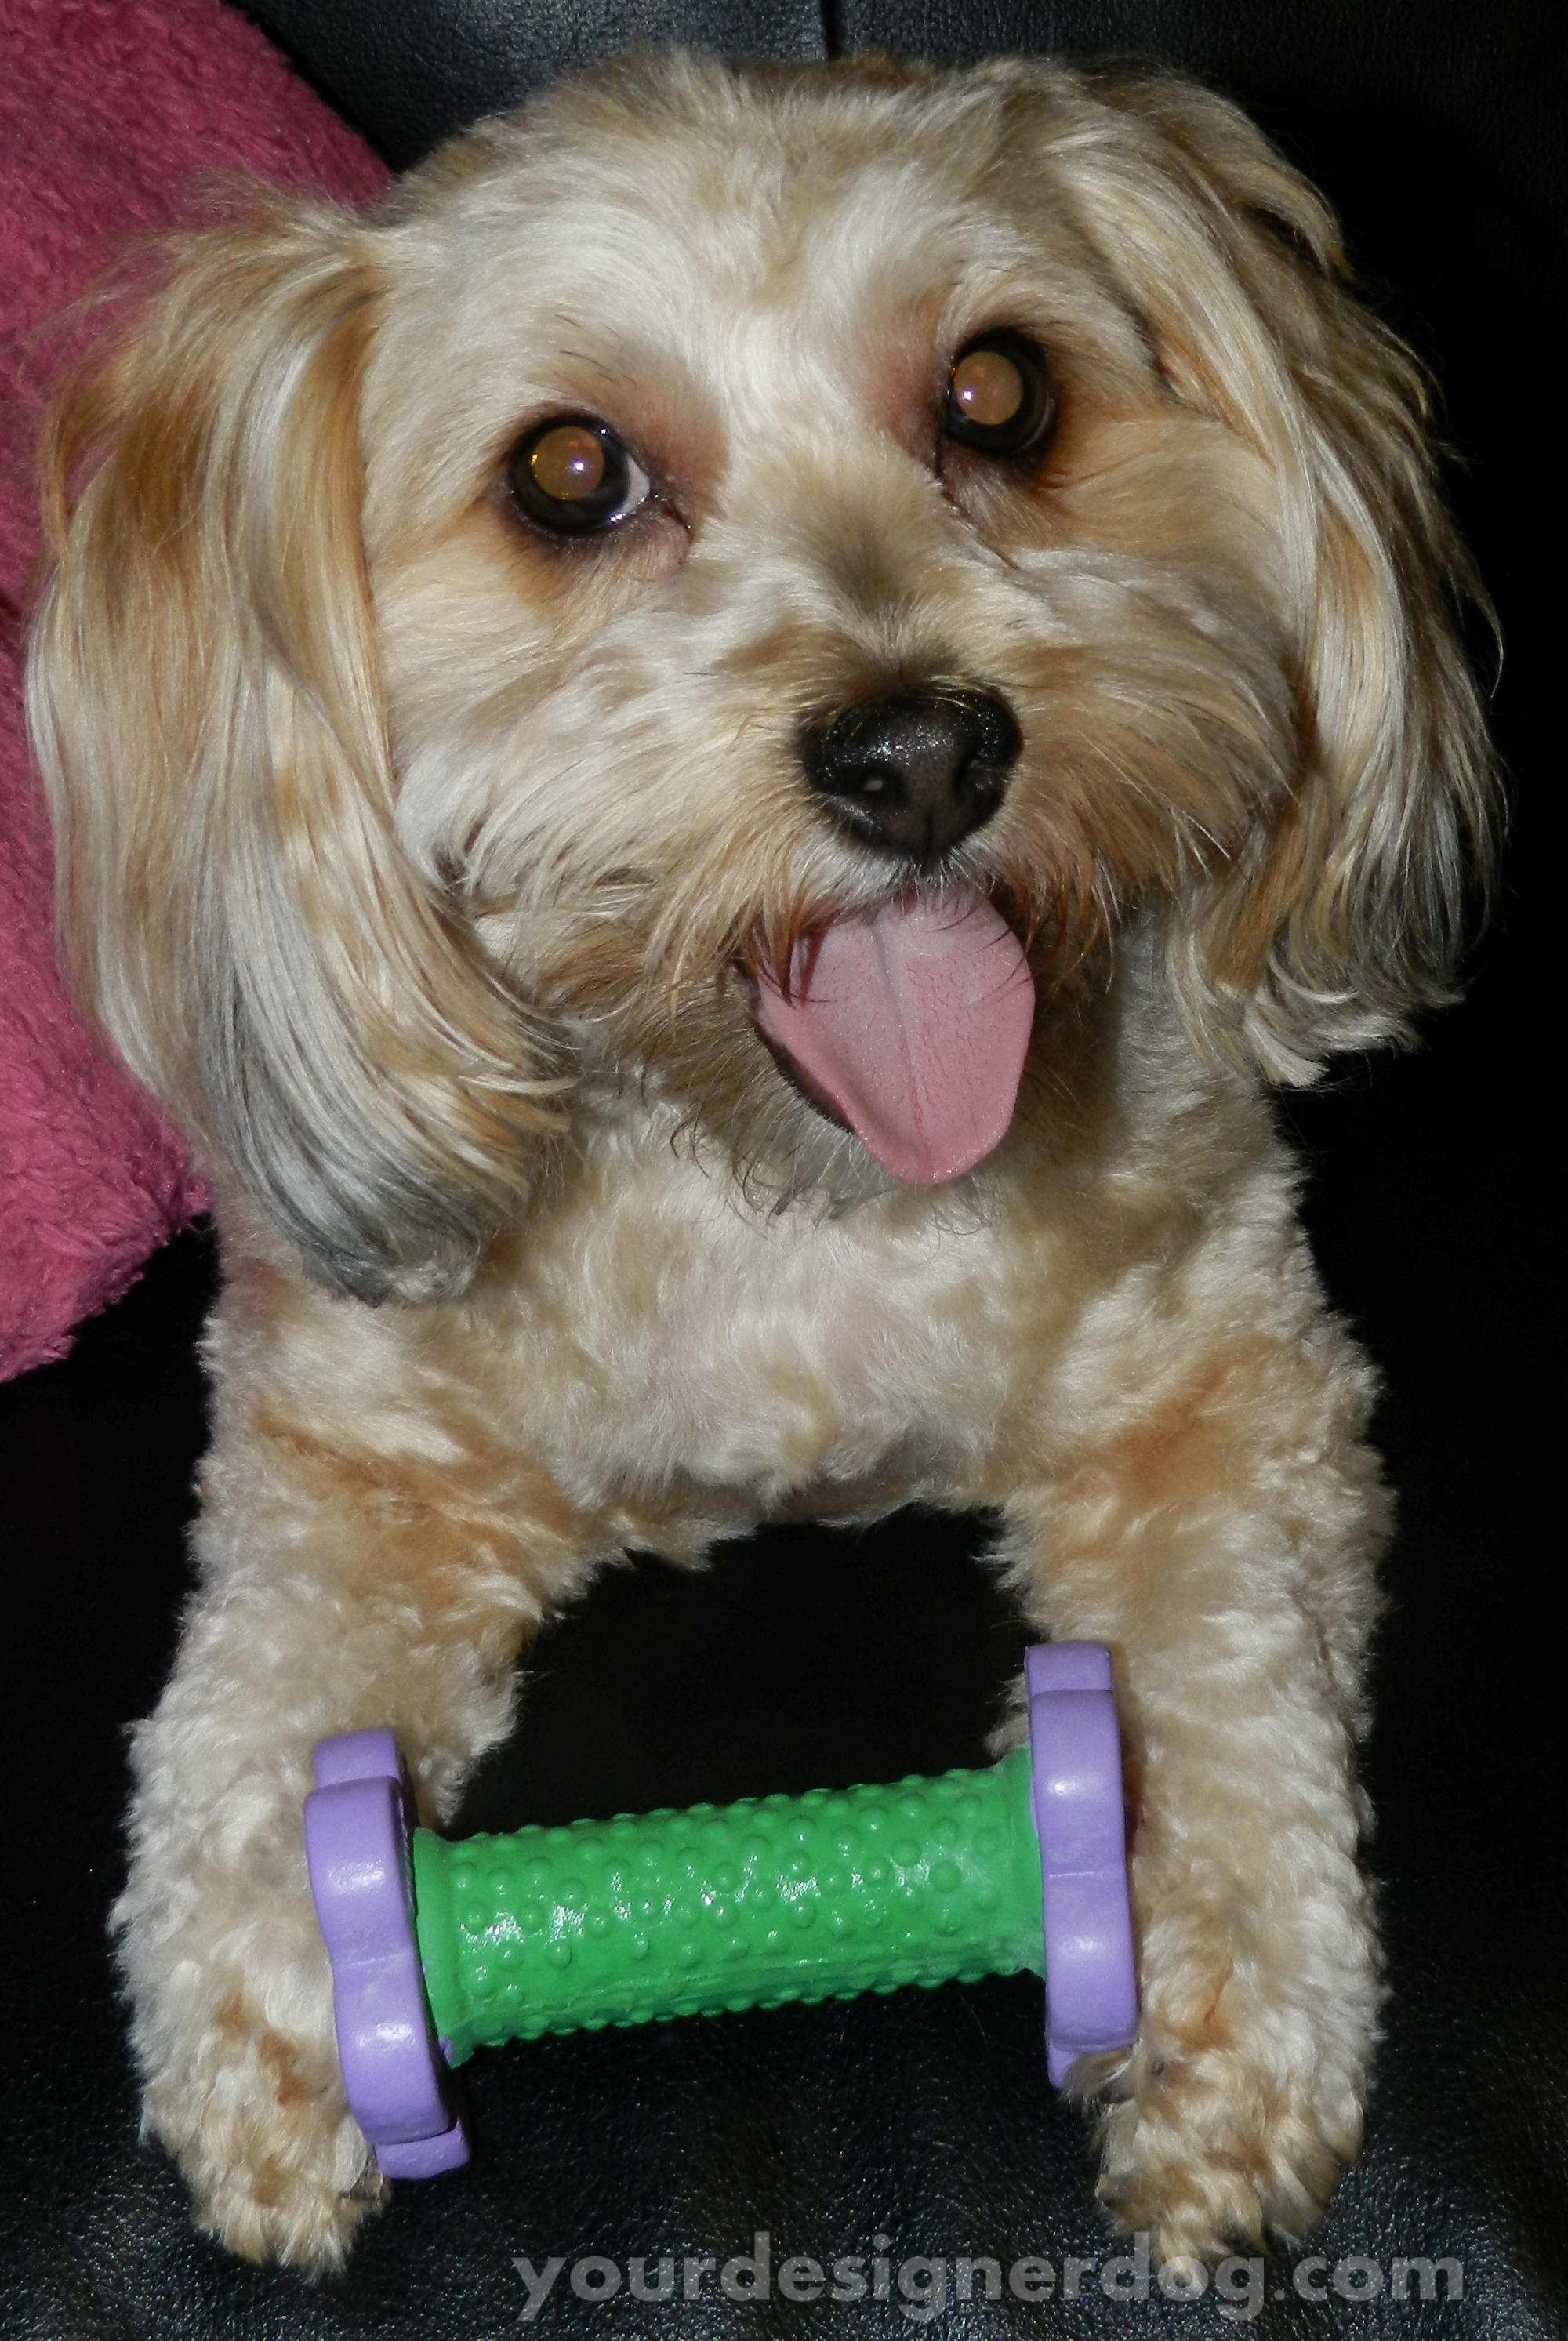 dogs, designer dogs, yorkipoo, yorkie poo, dog toy, barbell, weightlifting